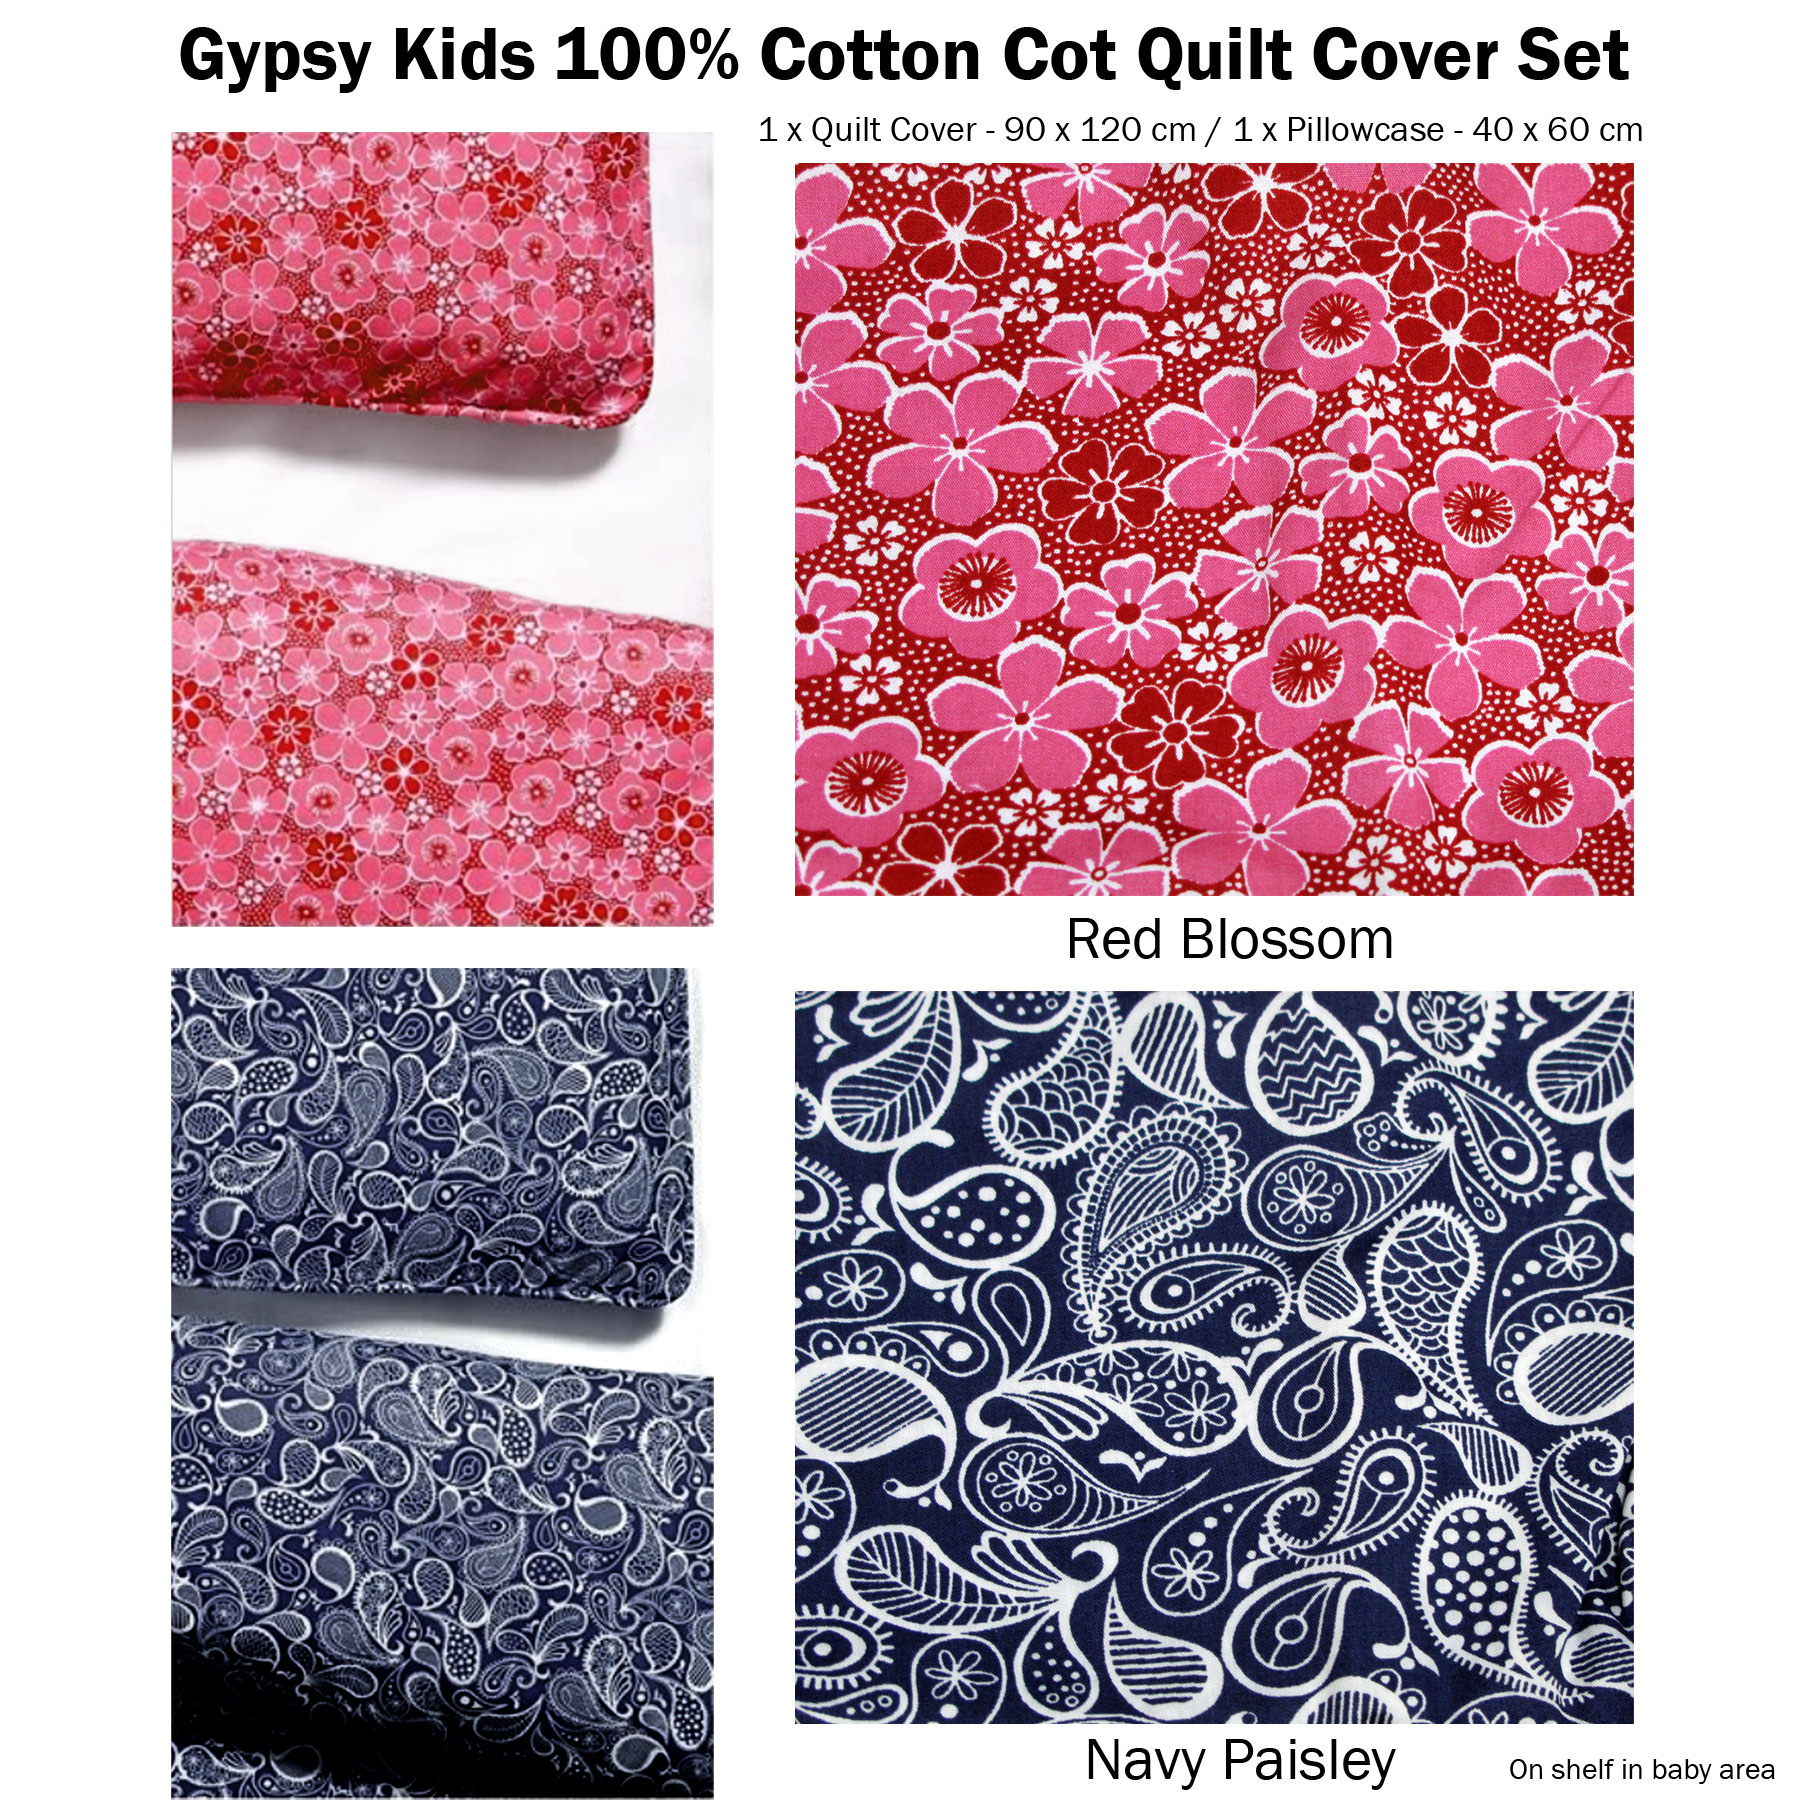 Gypsy Kids Quality 100% Cotton Baby Cot Quilt Cover with Pillowcase